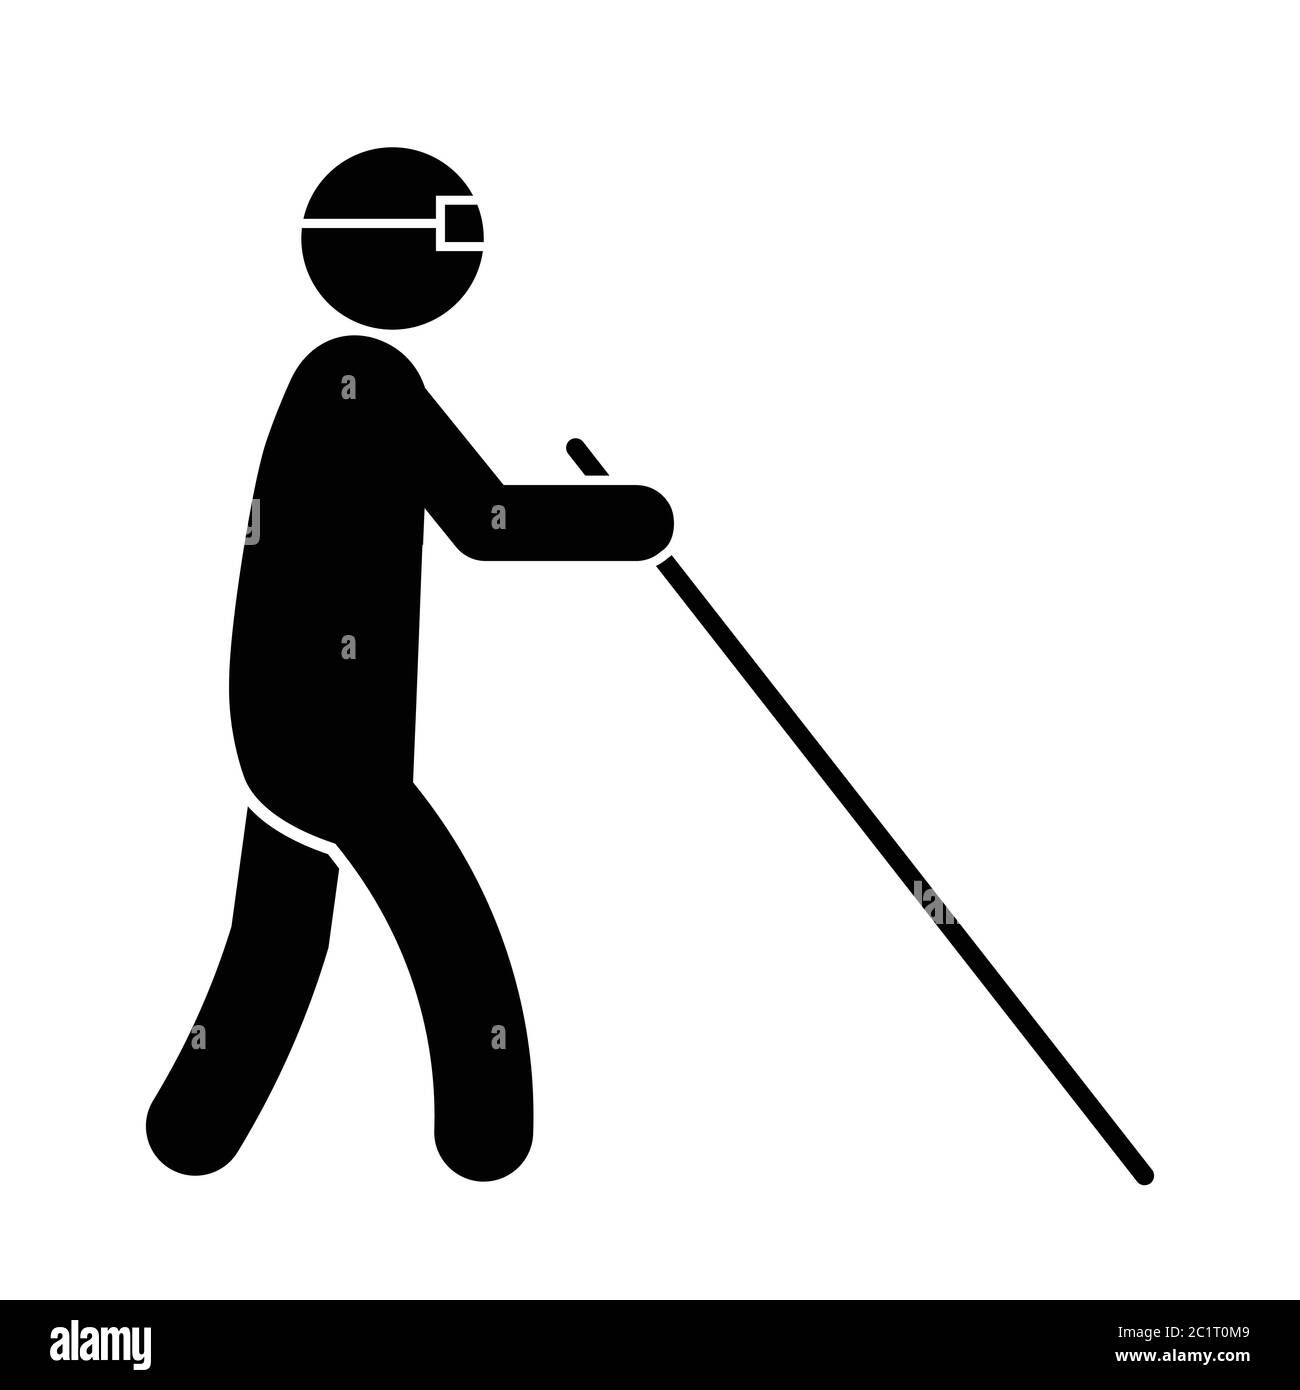 Blind Man Stick Figure Walking With a White Cane and Glasses. Black Illustration Isolated on a White Background. EPS Vector Stock Vector